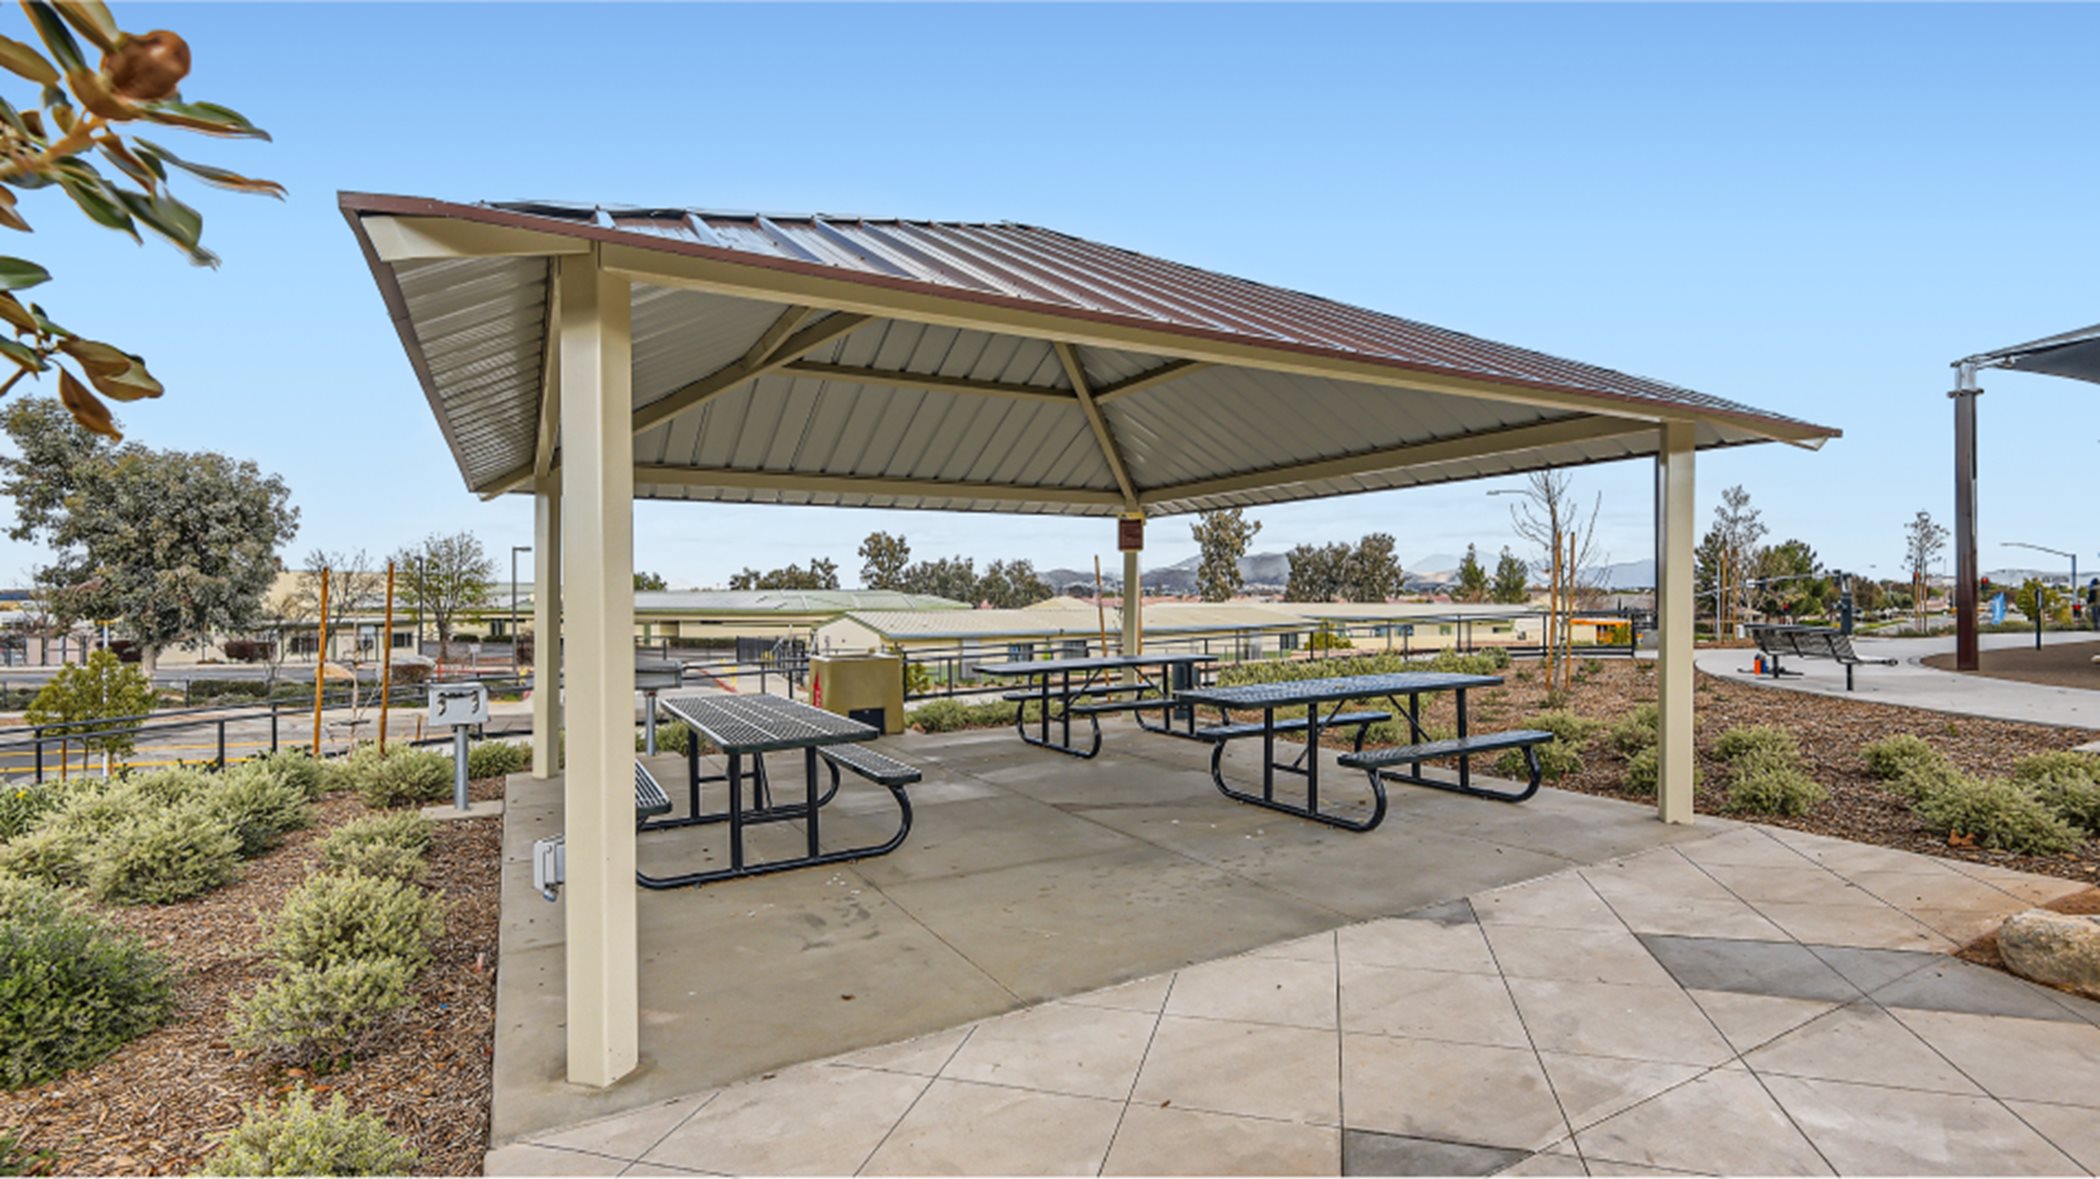 Covered picnic area with benches